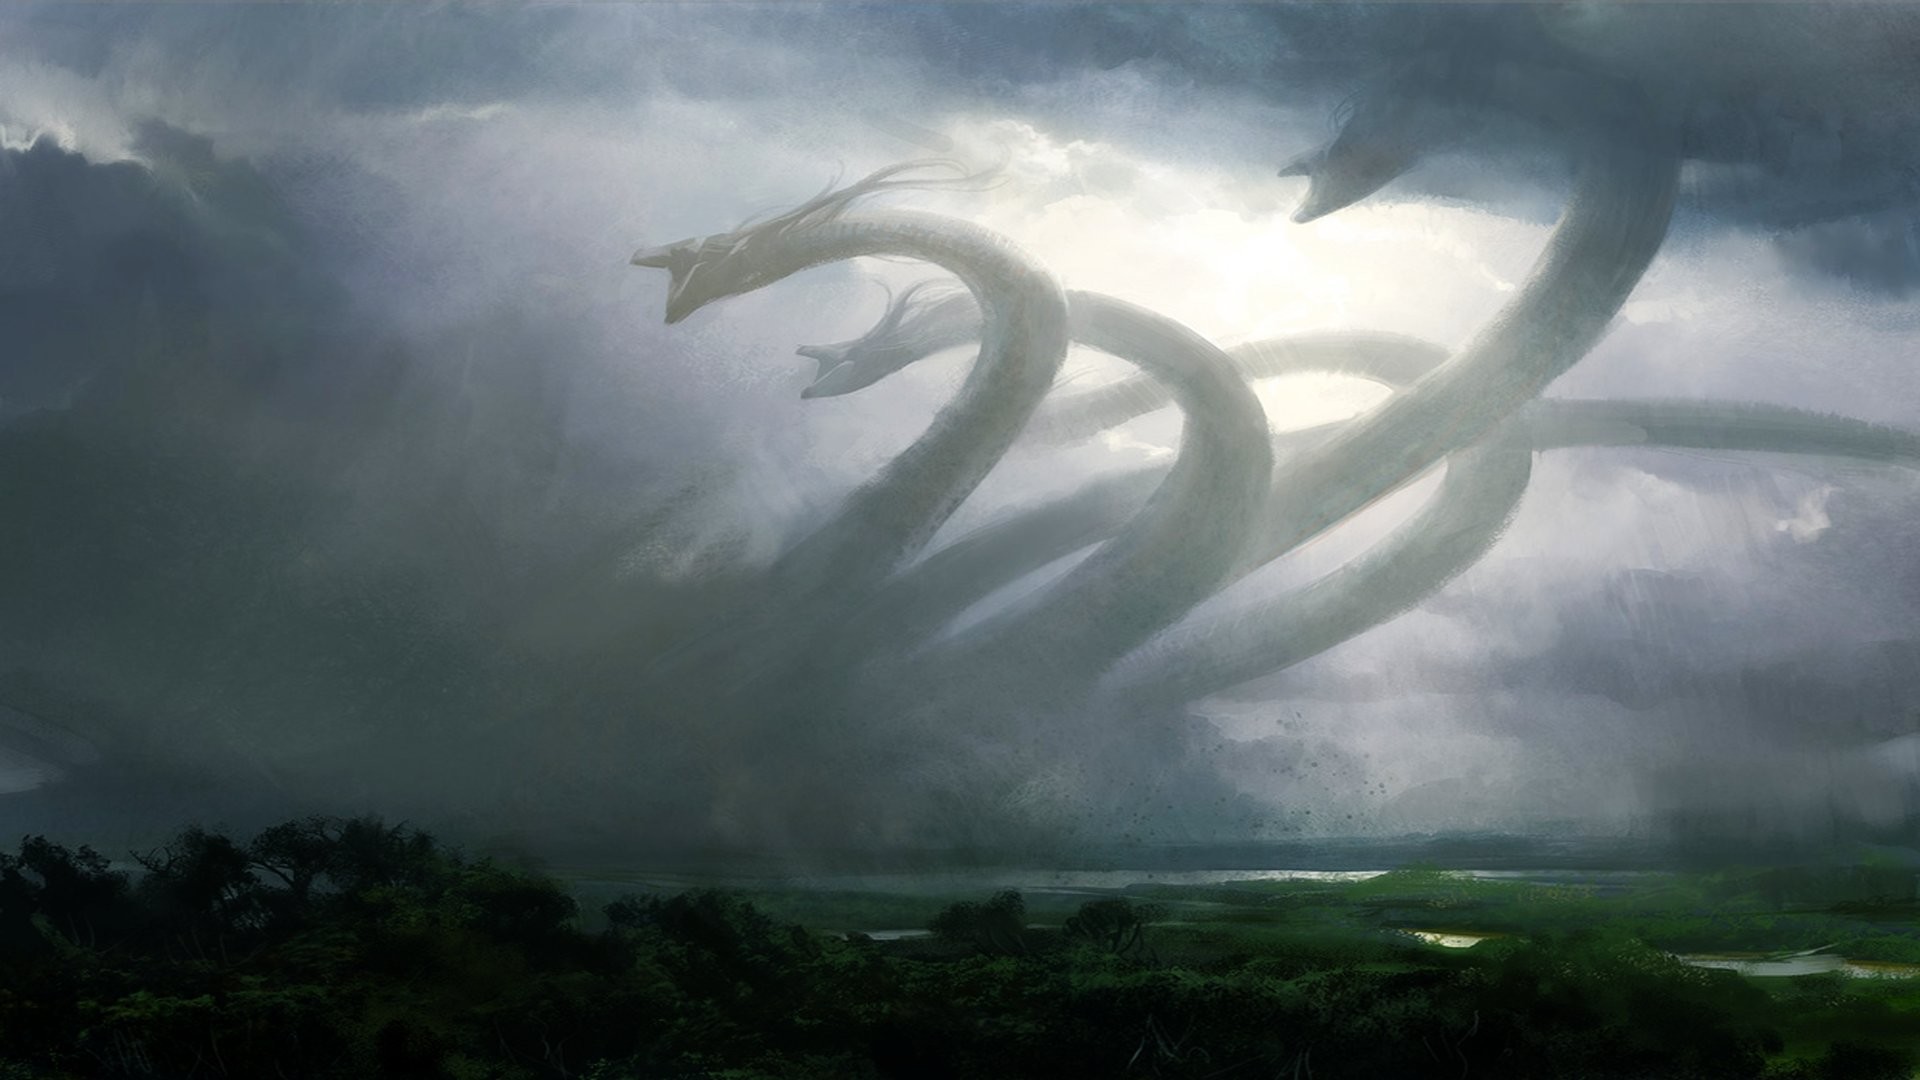 1920x1080 ... Stunning Images Collection: Storm Desktop Wallpapers ...